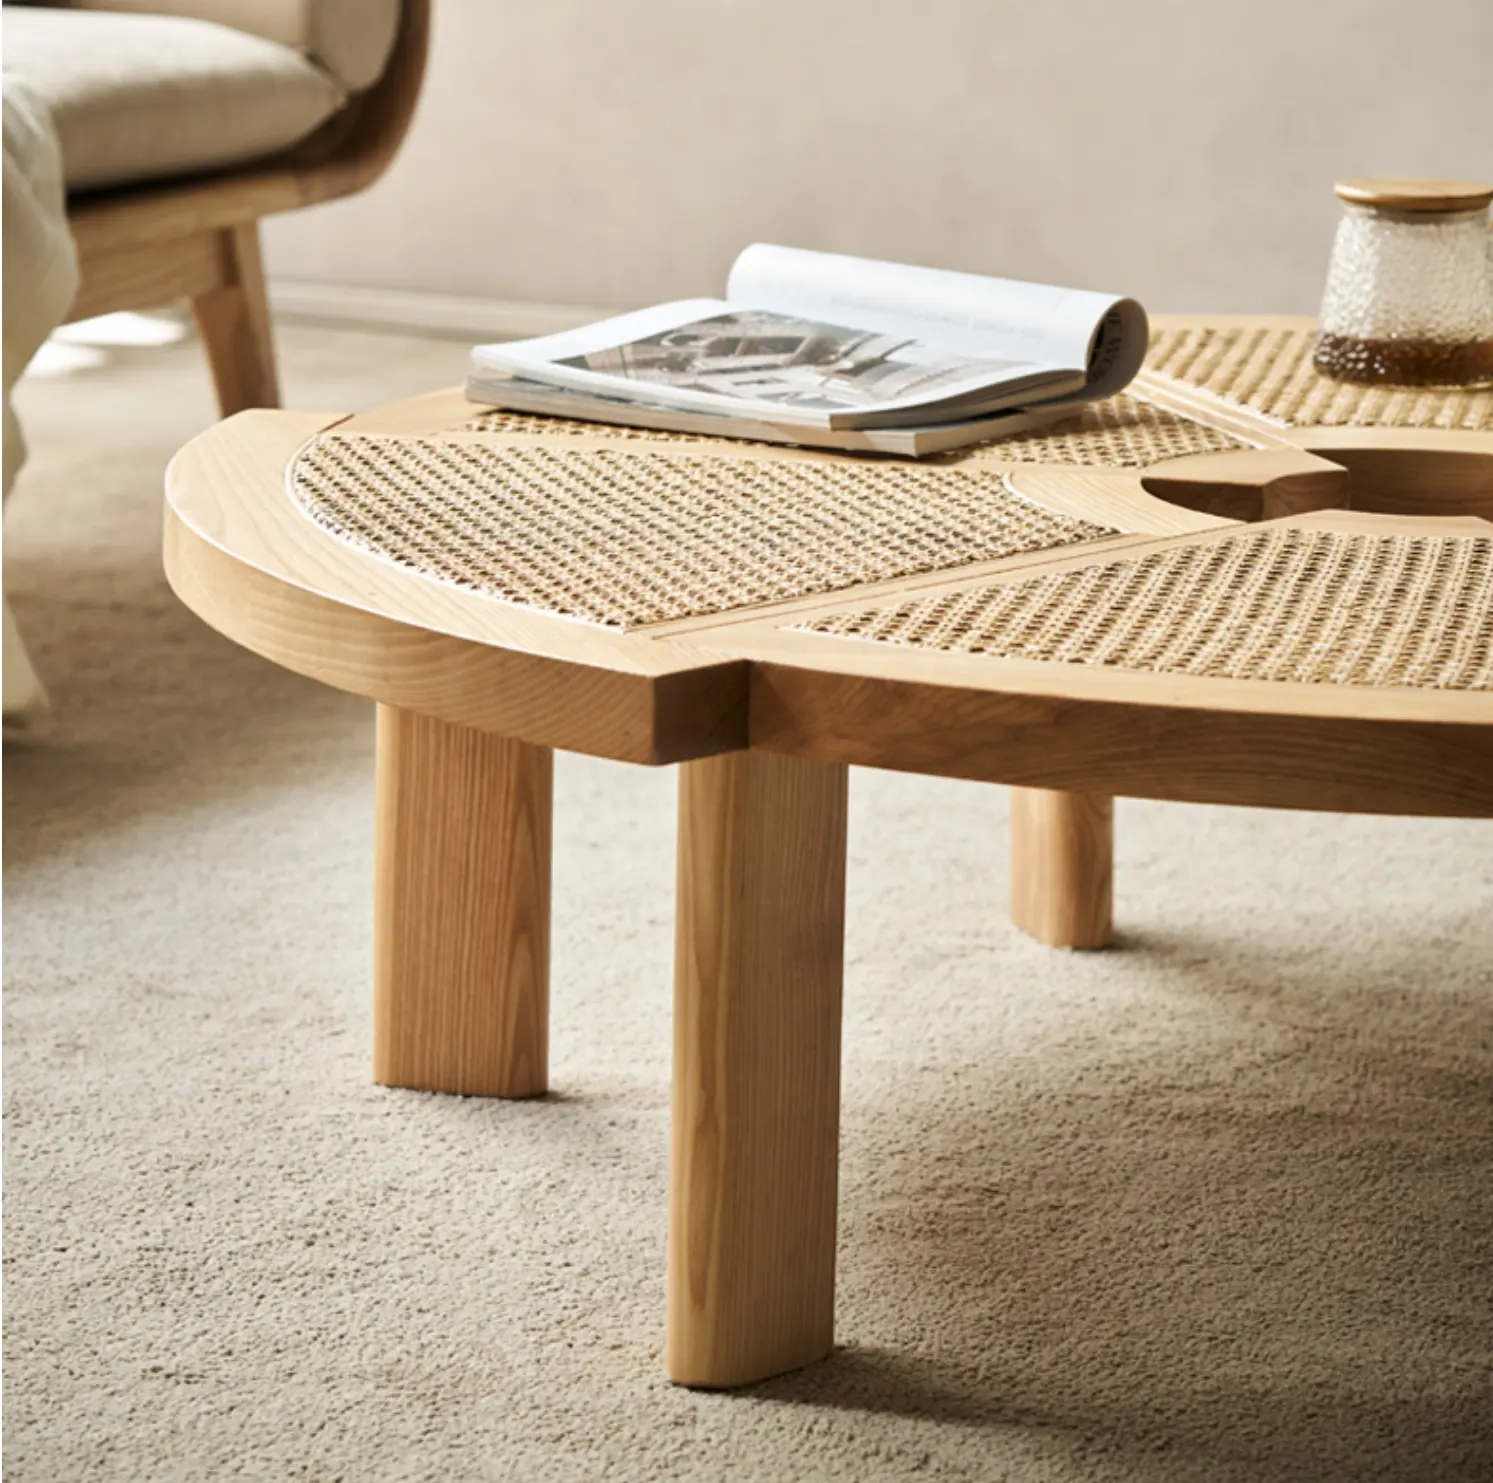 New Arrival Northern Europe Hotel Homestay Wood Indonesian Rattan Coffee Table